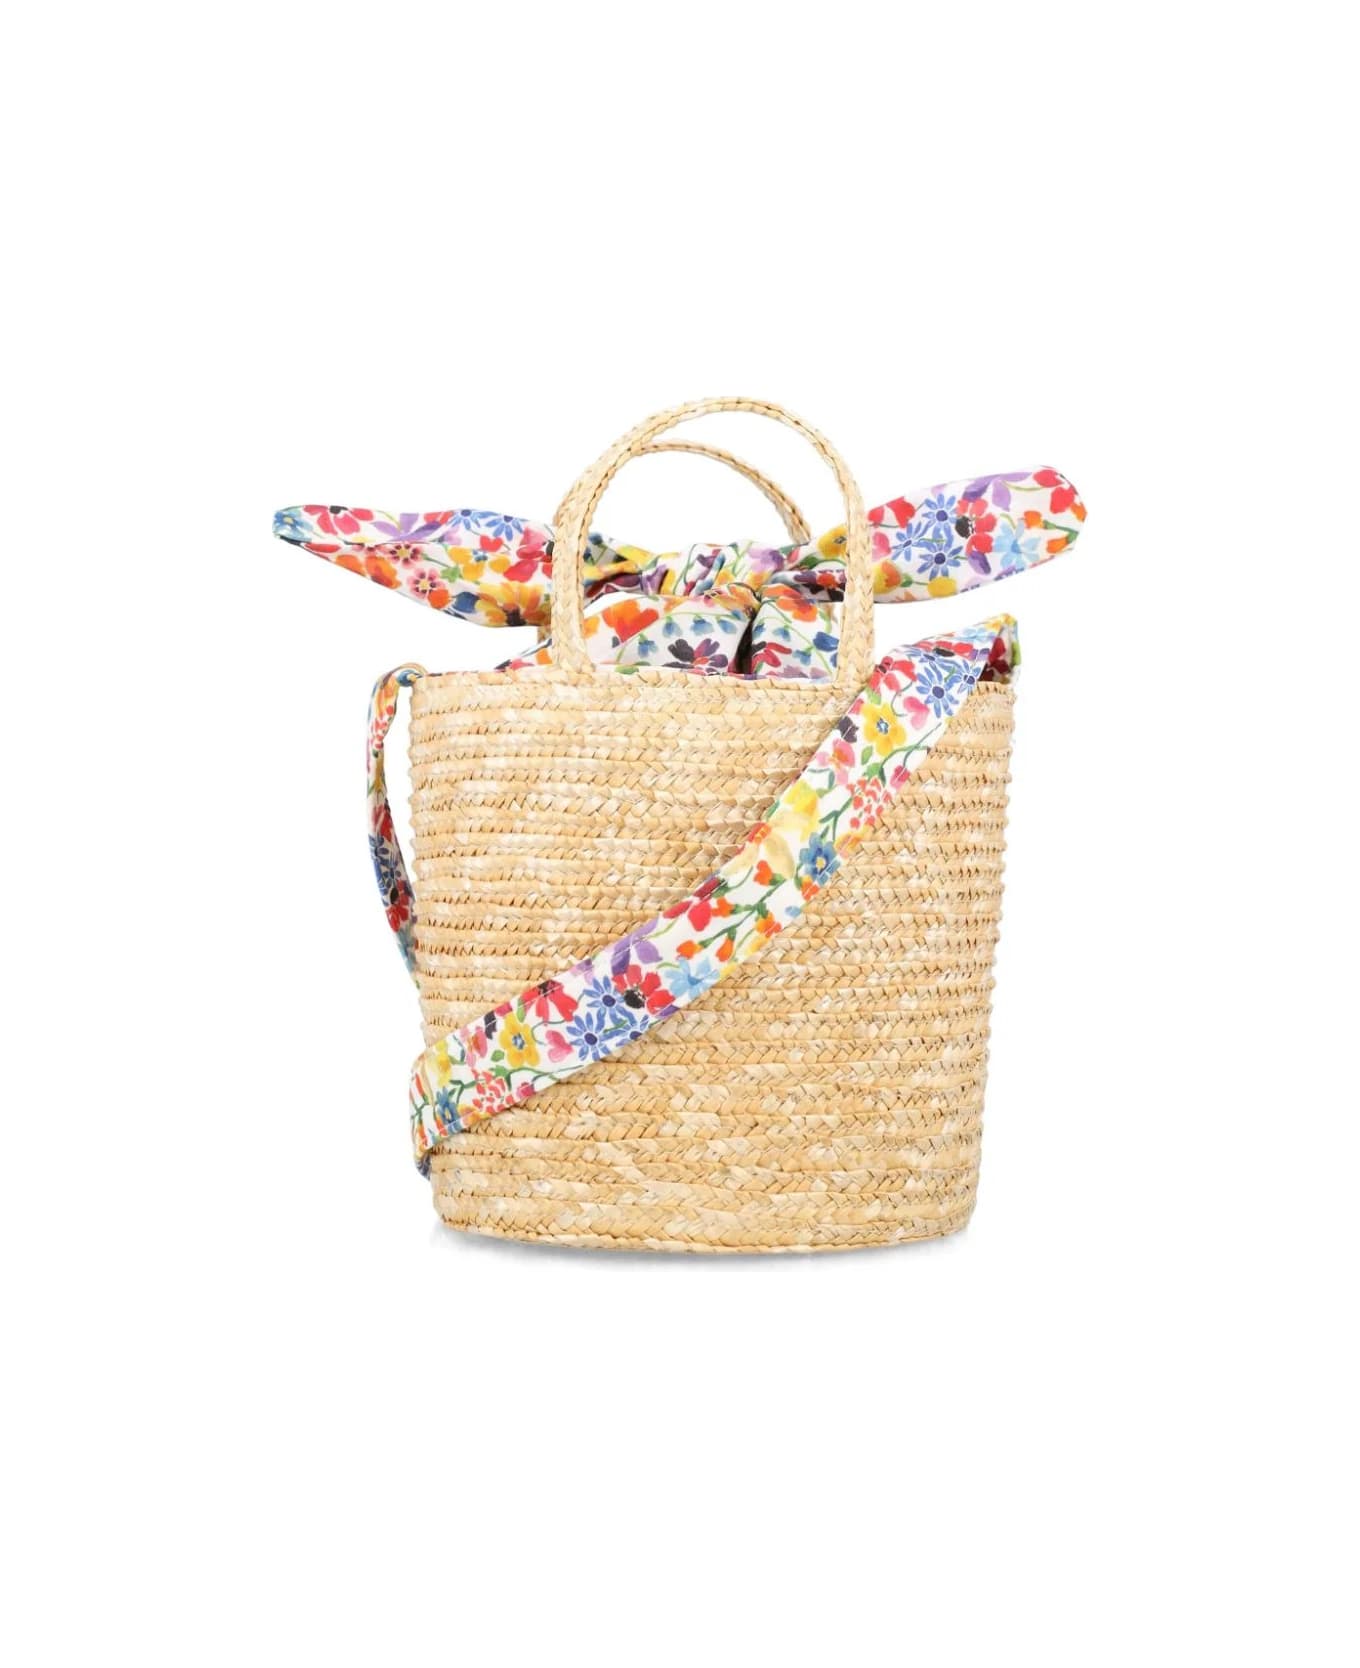 Il Gufo Liberty Fabric Cotton And Natural Straw Bucket Bag - Multicolour アクセサリー＆ギフト